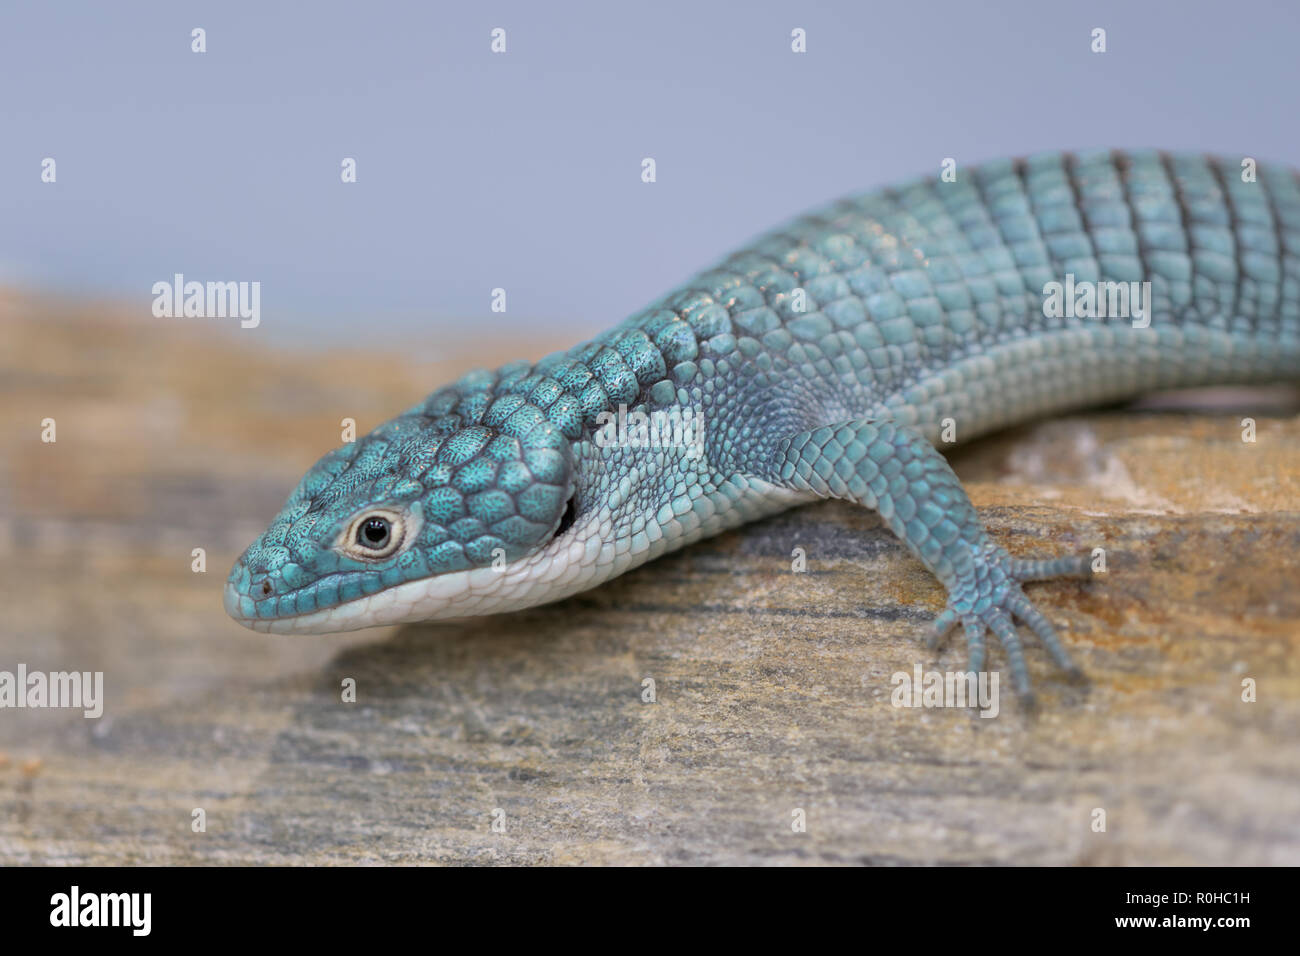 Closeup of an Alligator lizard (from Mexico) Stock Photo